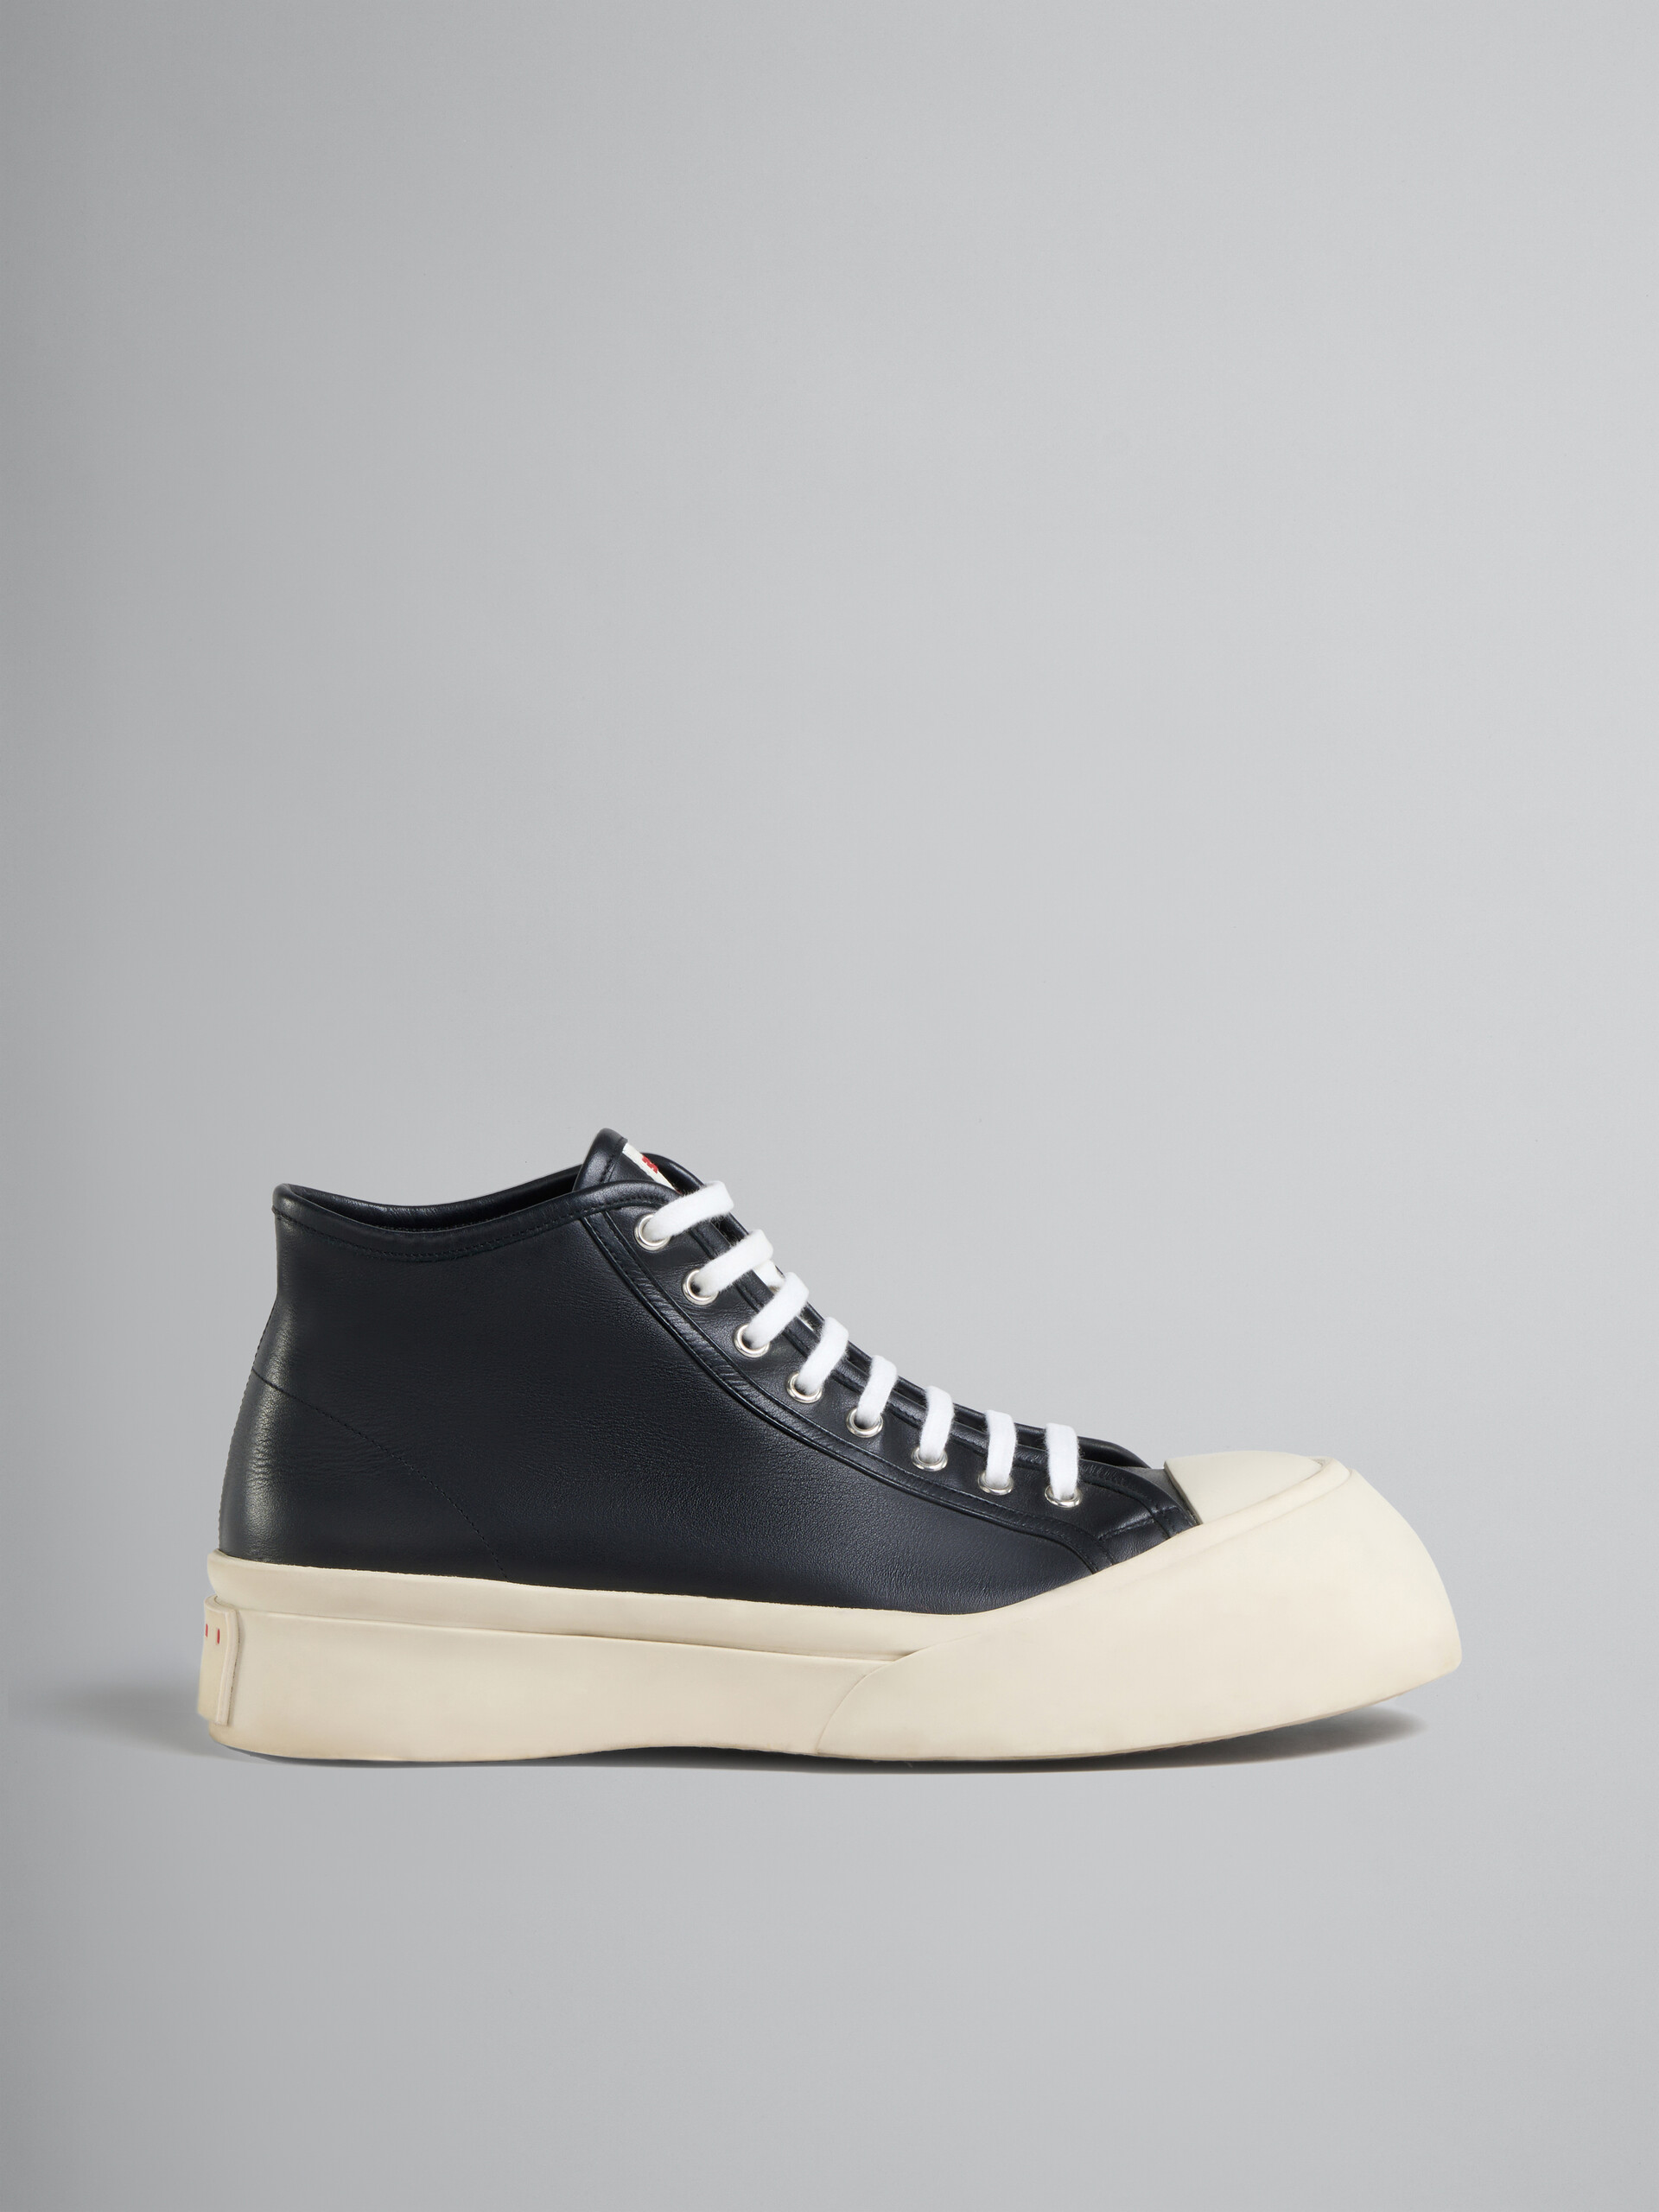 Black nappa leather Pablo high-top sneaker - Sneakers - Image 1